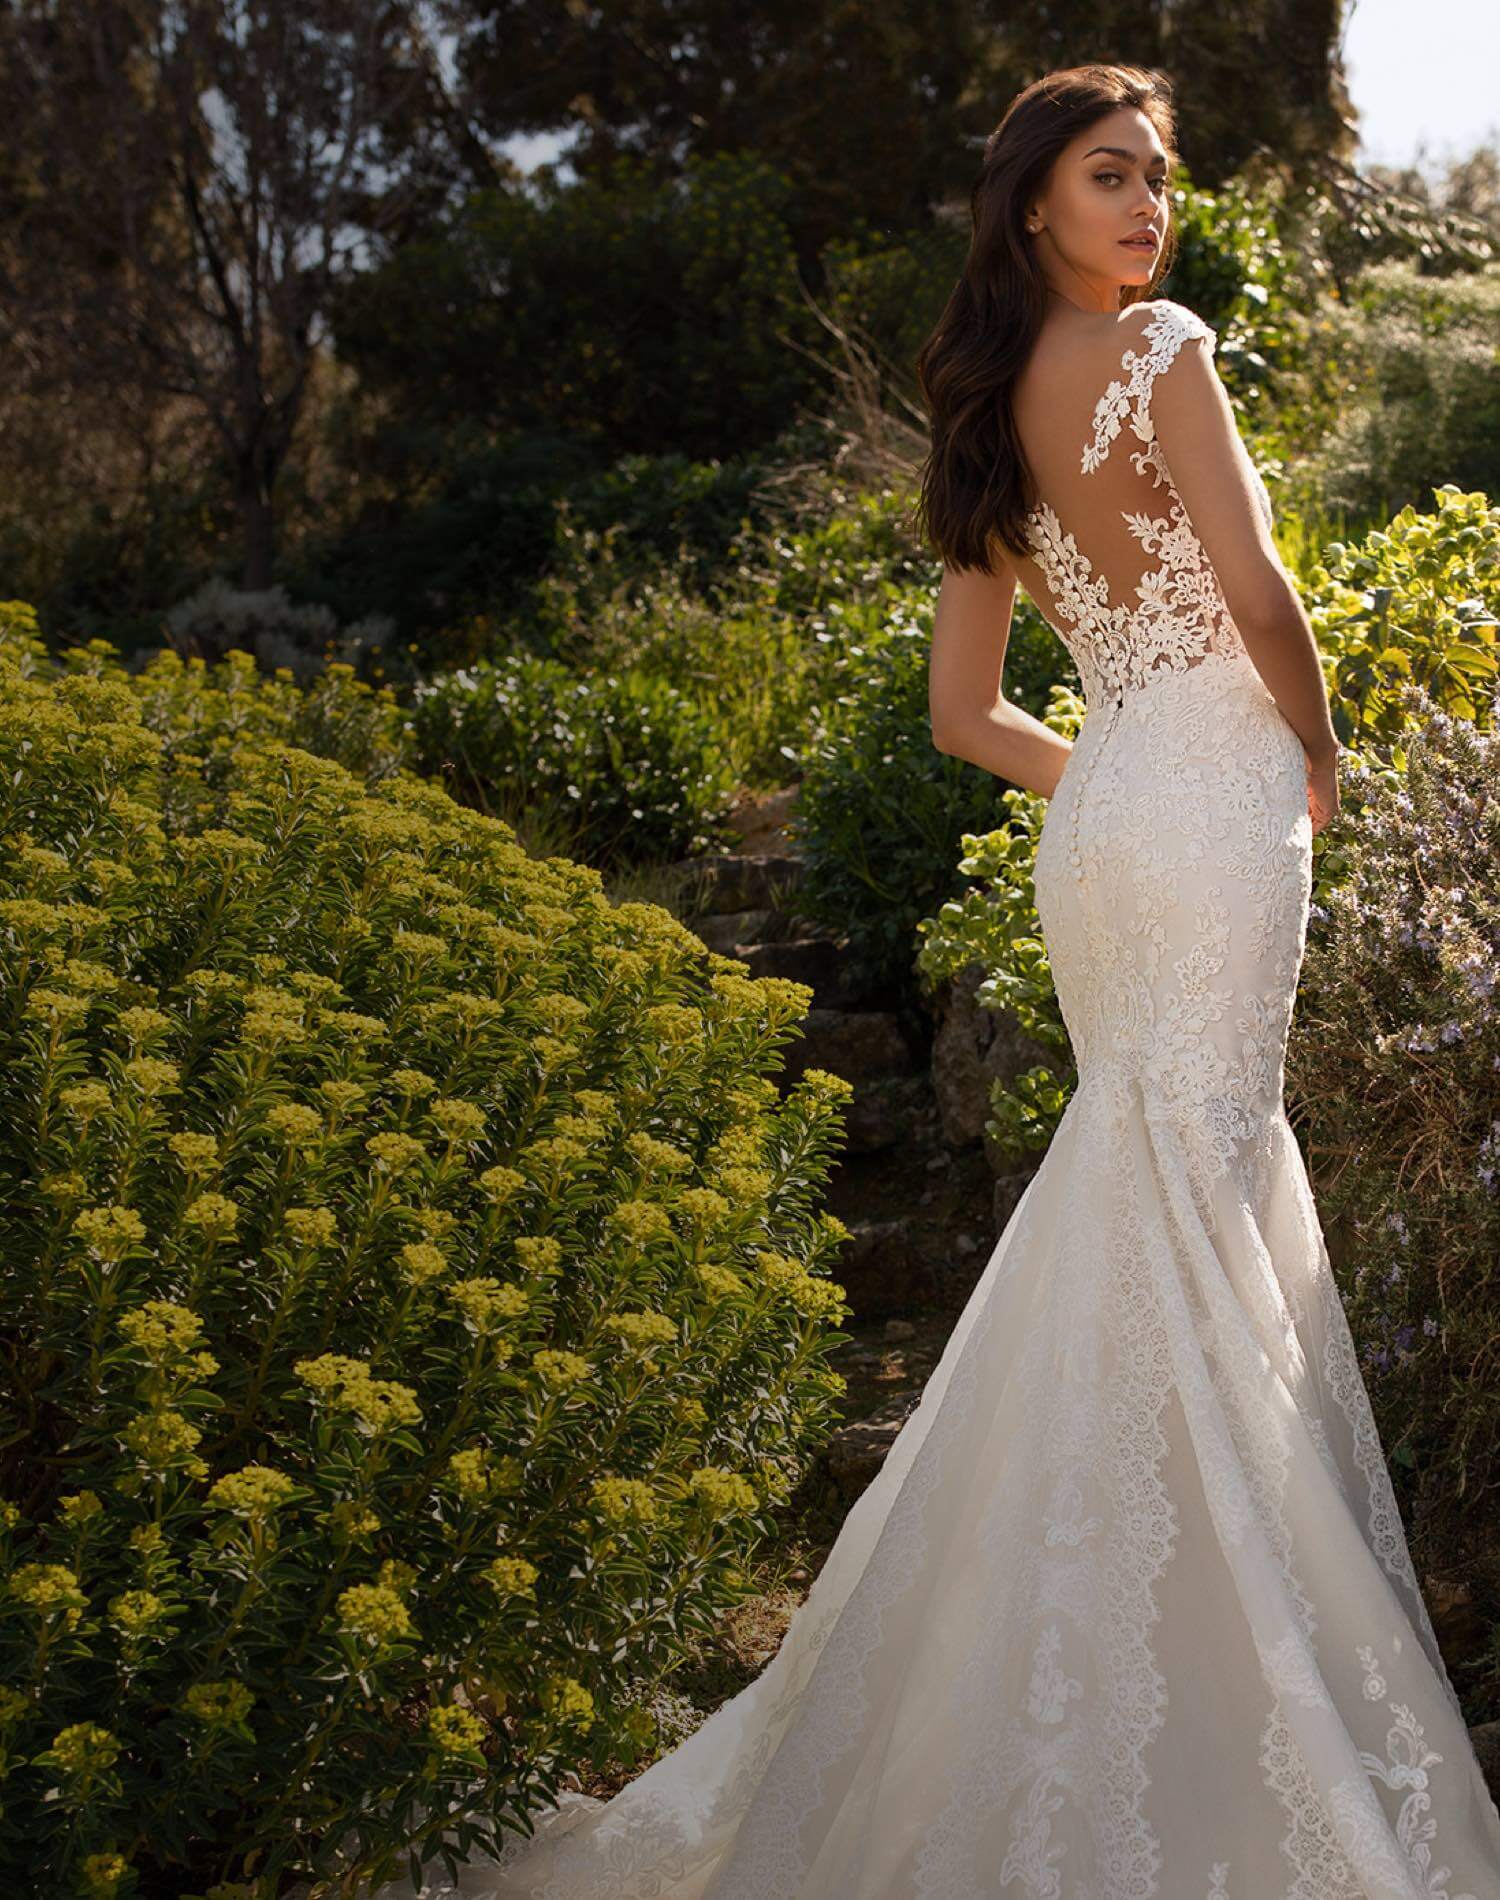 Model wearing a Pronovias bridal gown shown on mobile device